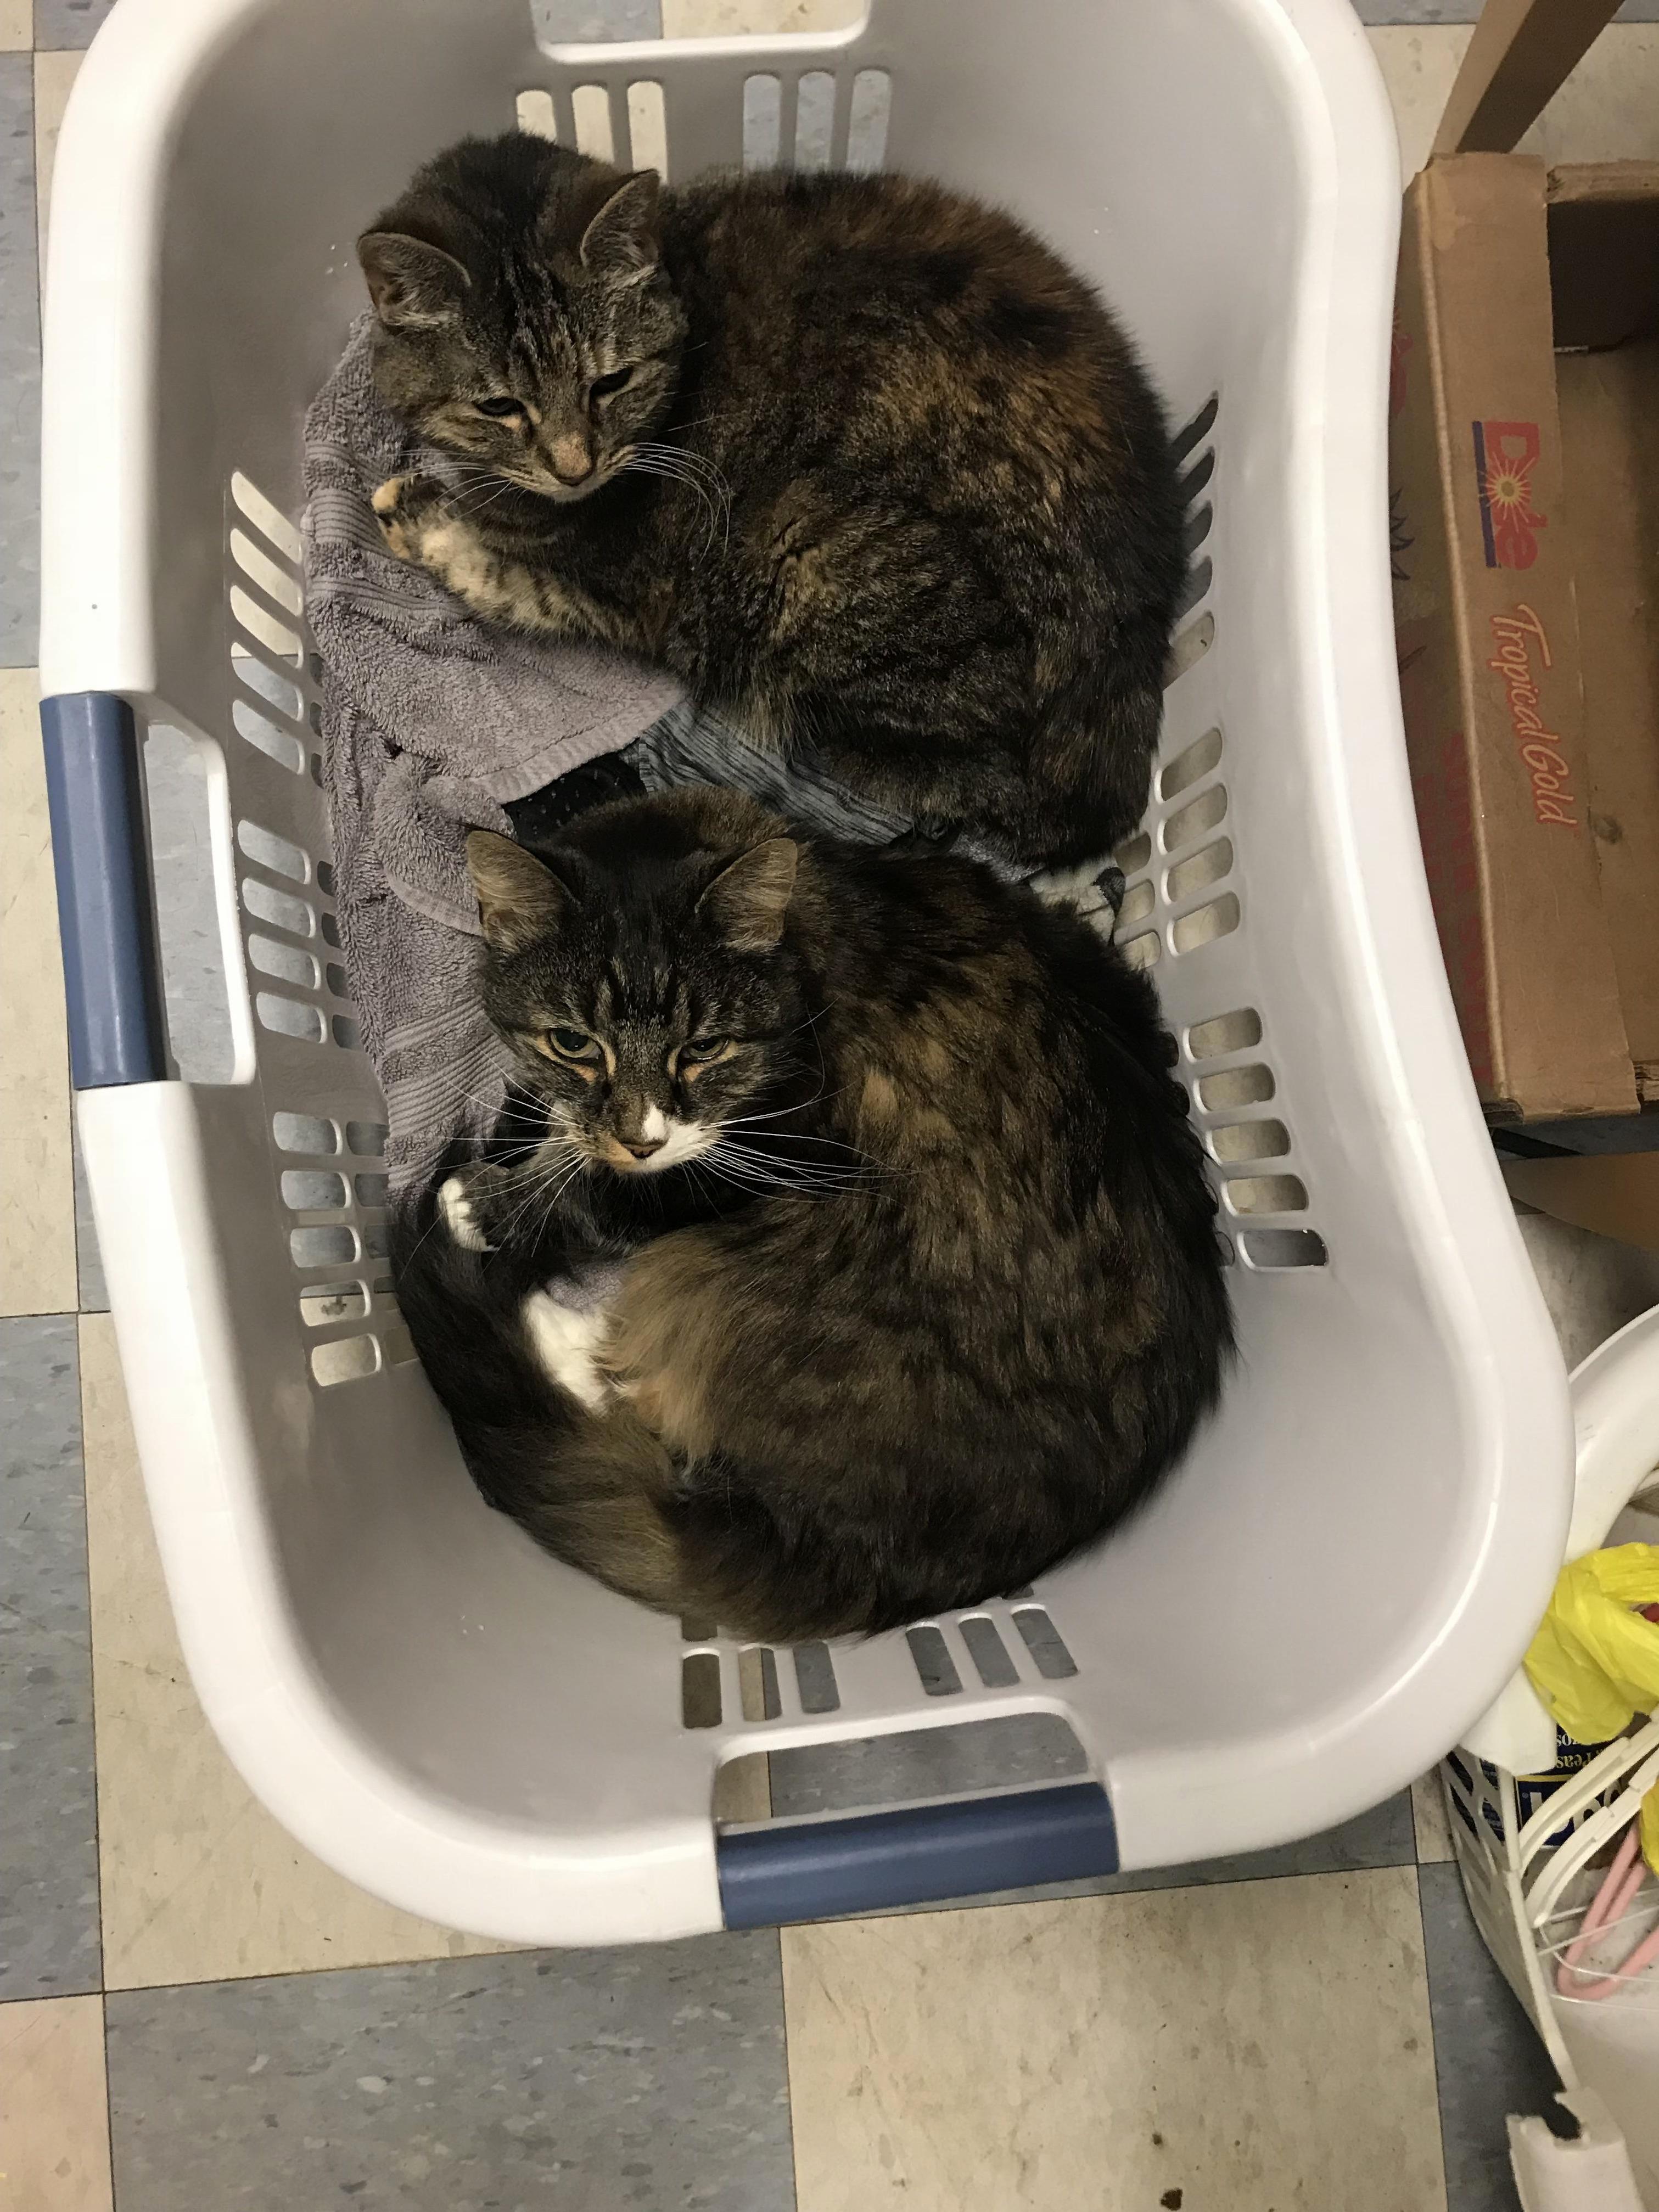 My precious fur babies… they sure do love the laundry